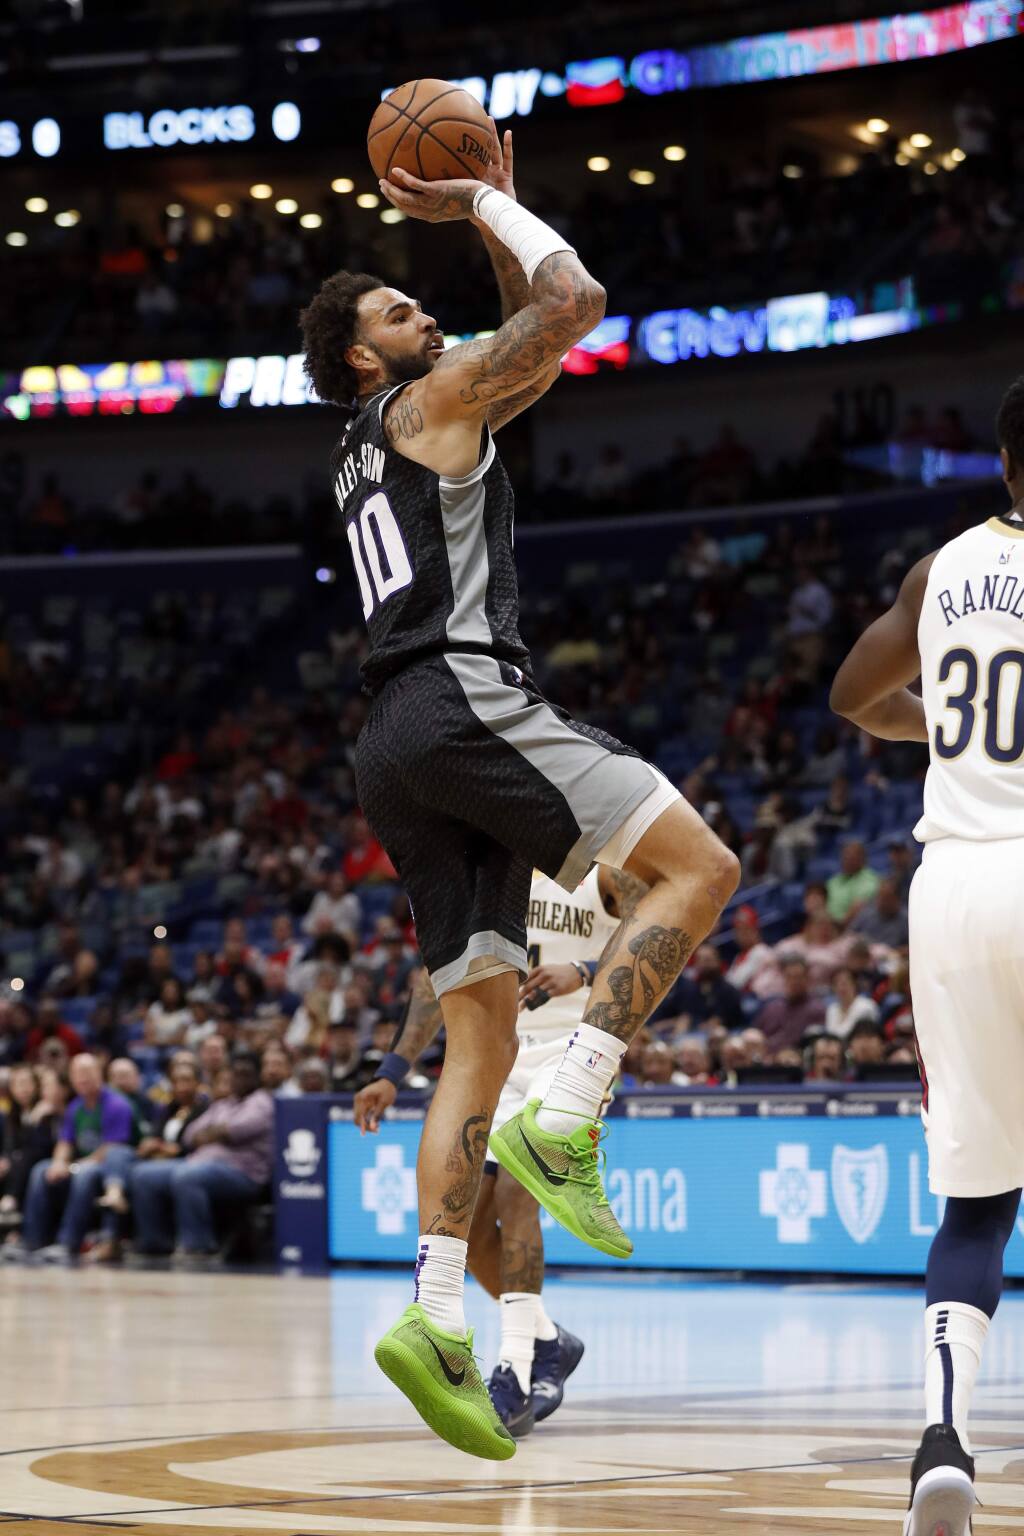 Opinion: What To Expect in Willie Cauley-Stein's Return